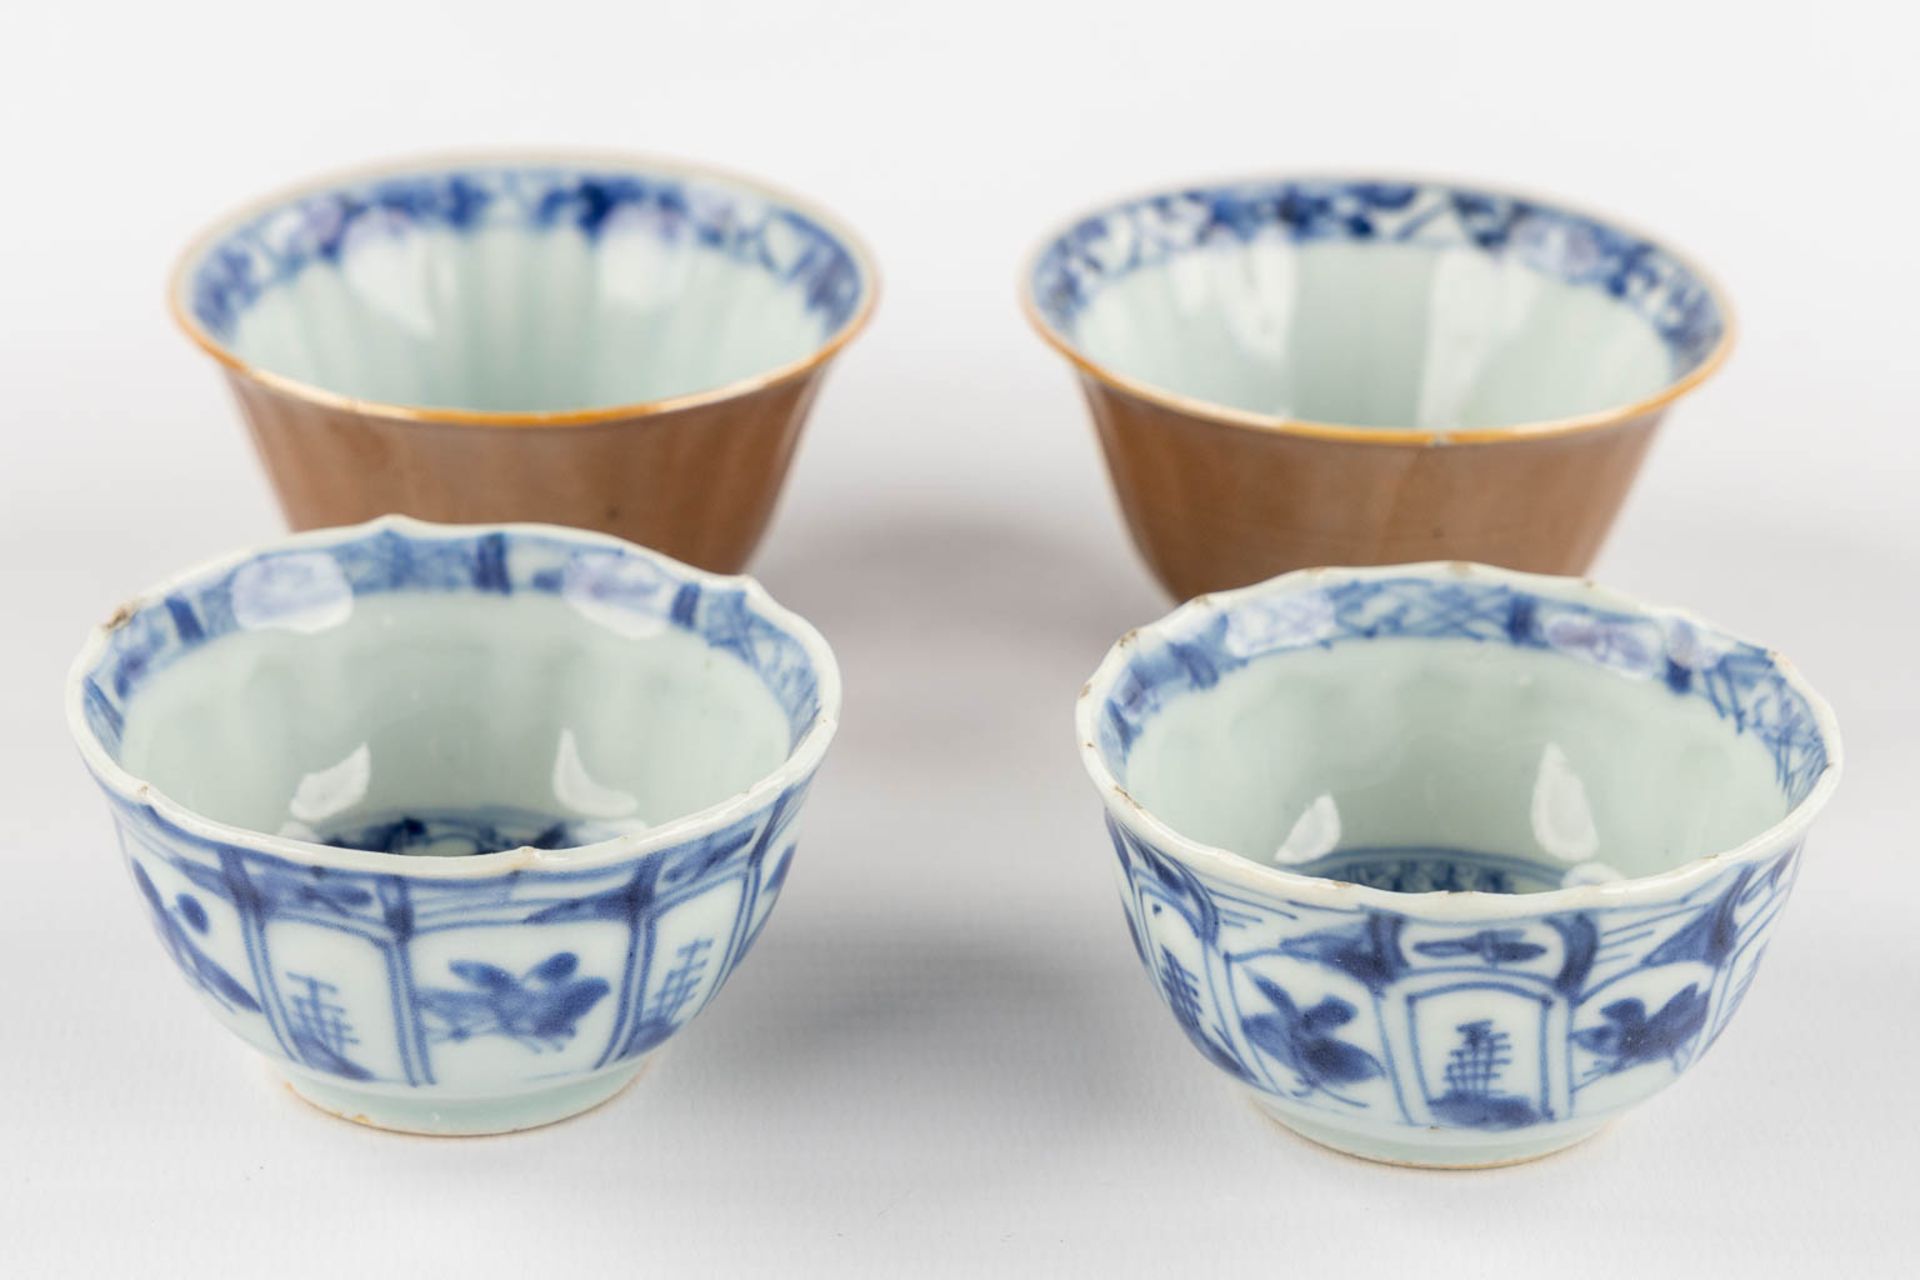 Fifteen Chinese cups, saucers and plates, blue white and Famille Roze. (D:23,4 cm) - Image 12 of 15